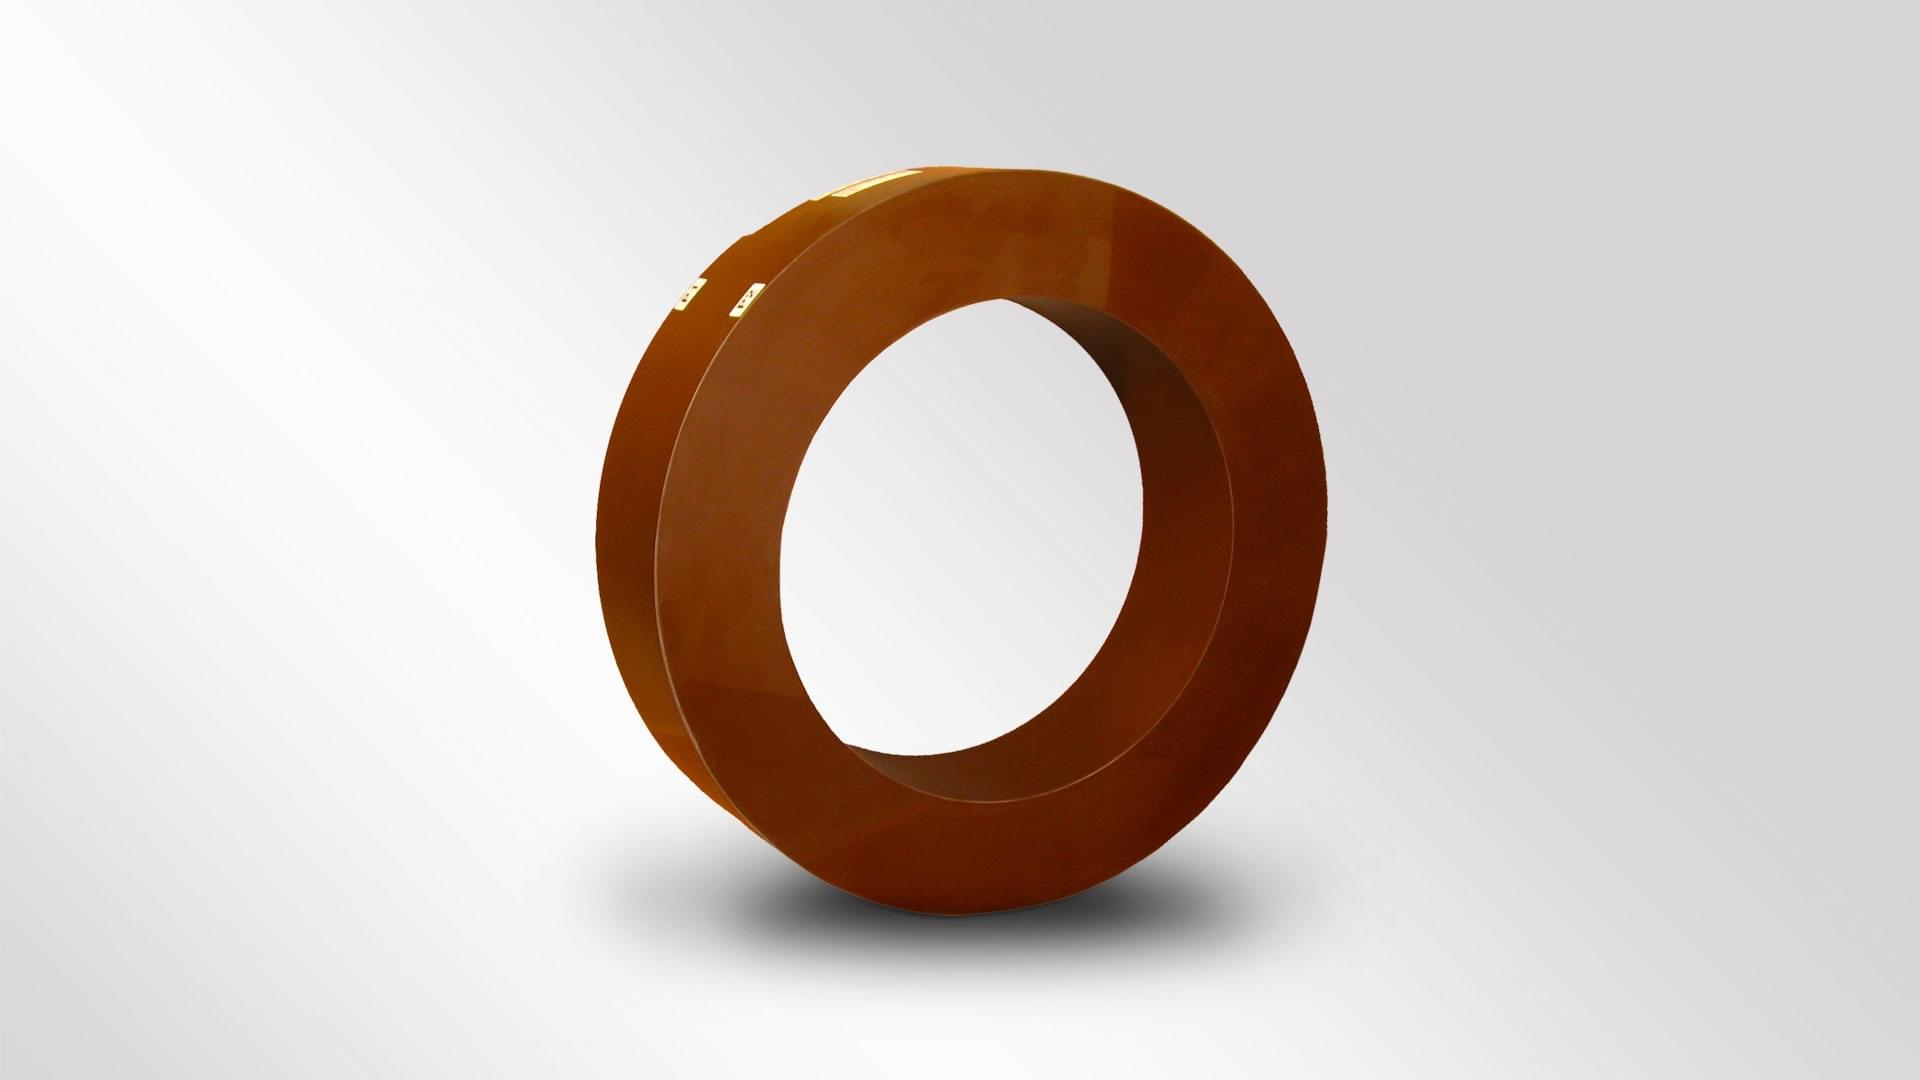 A copper-colored toroidal cast resin current transformer made of metal for use in generator leads up to 36kV